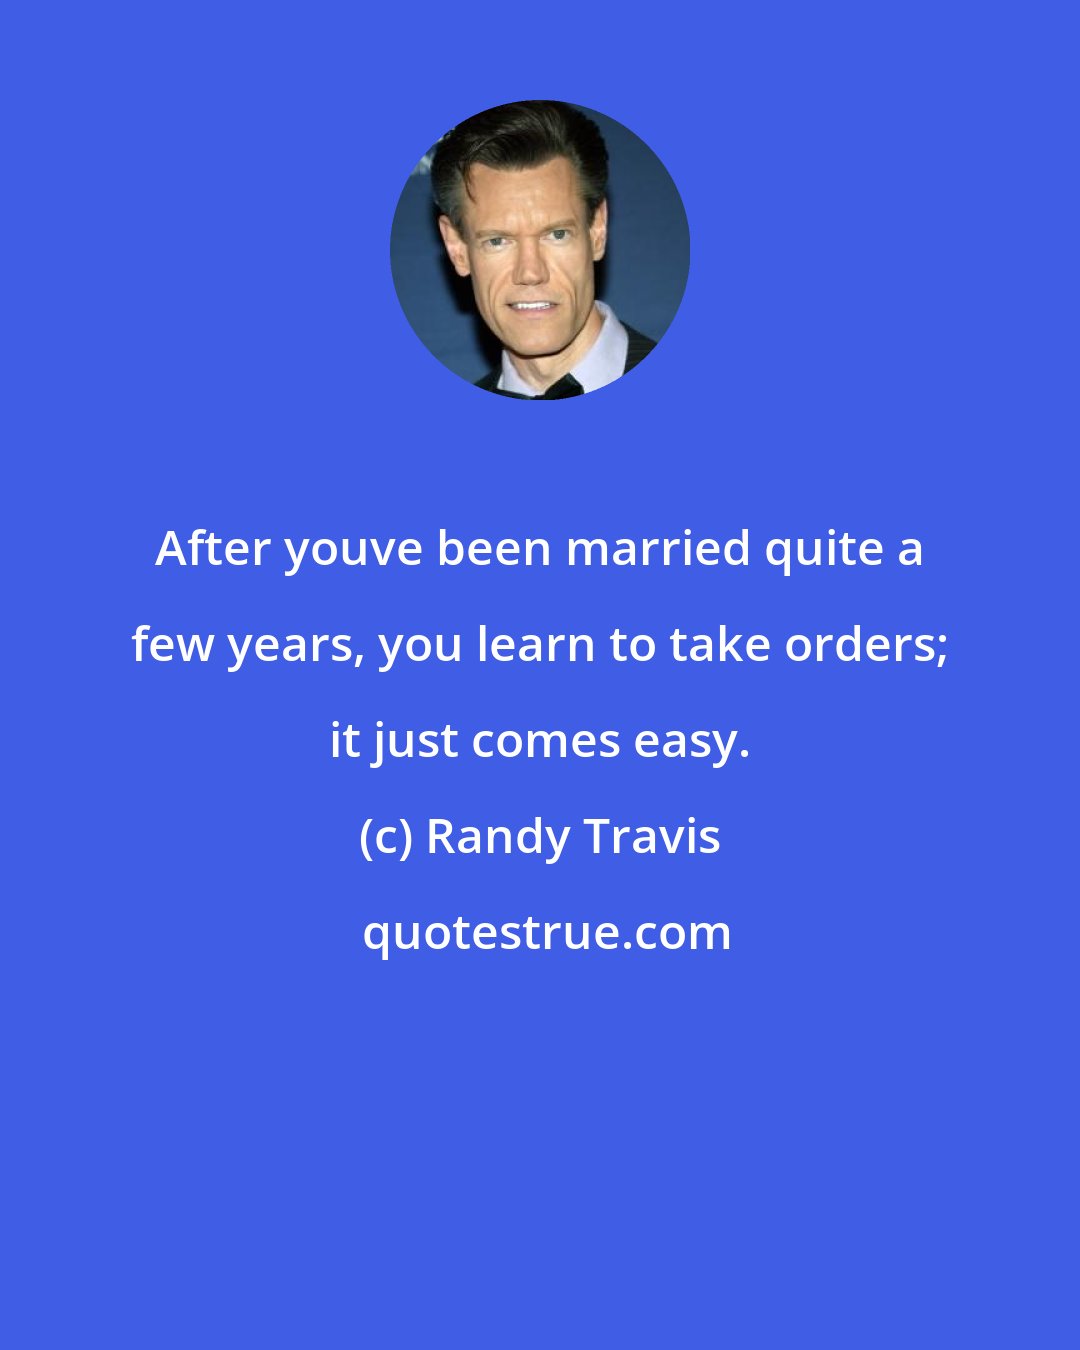 Randy Travis: After youve been married quite a few years, you learn to take orders; it just comes easy.